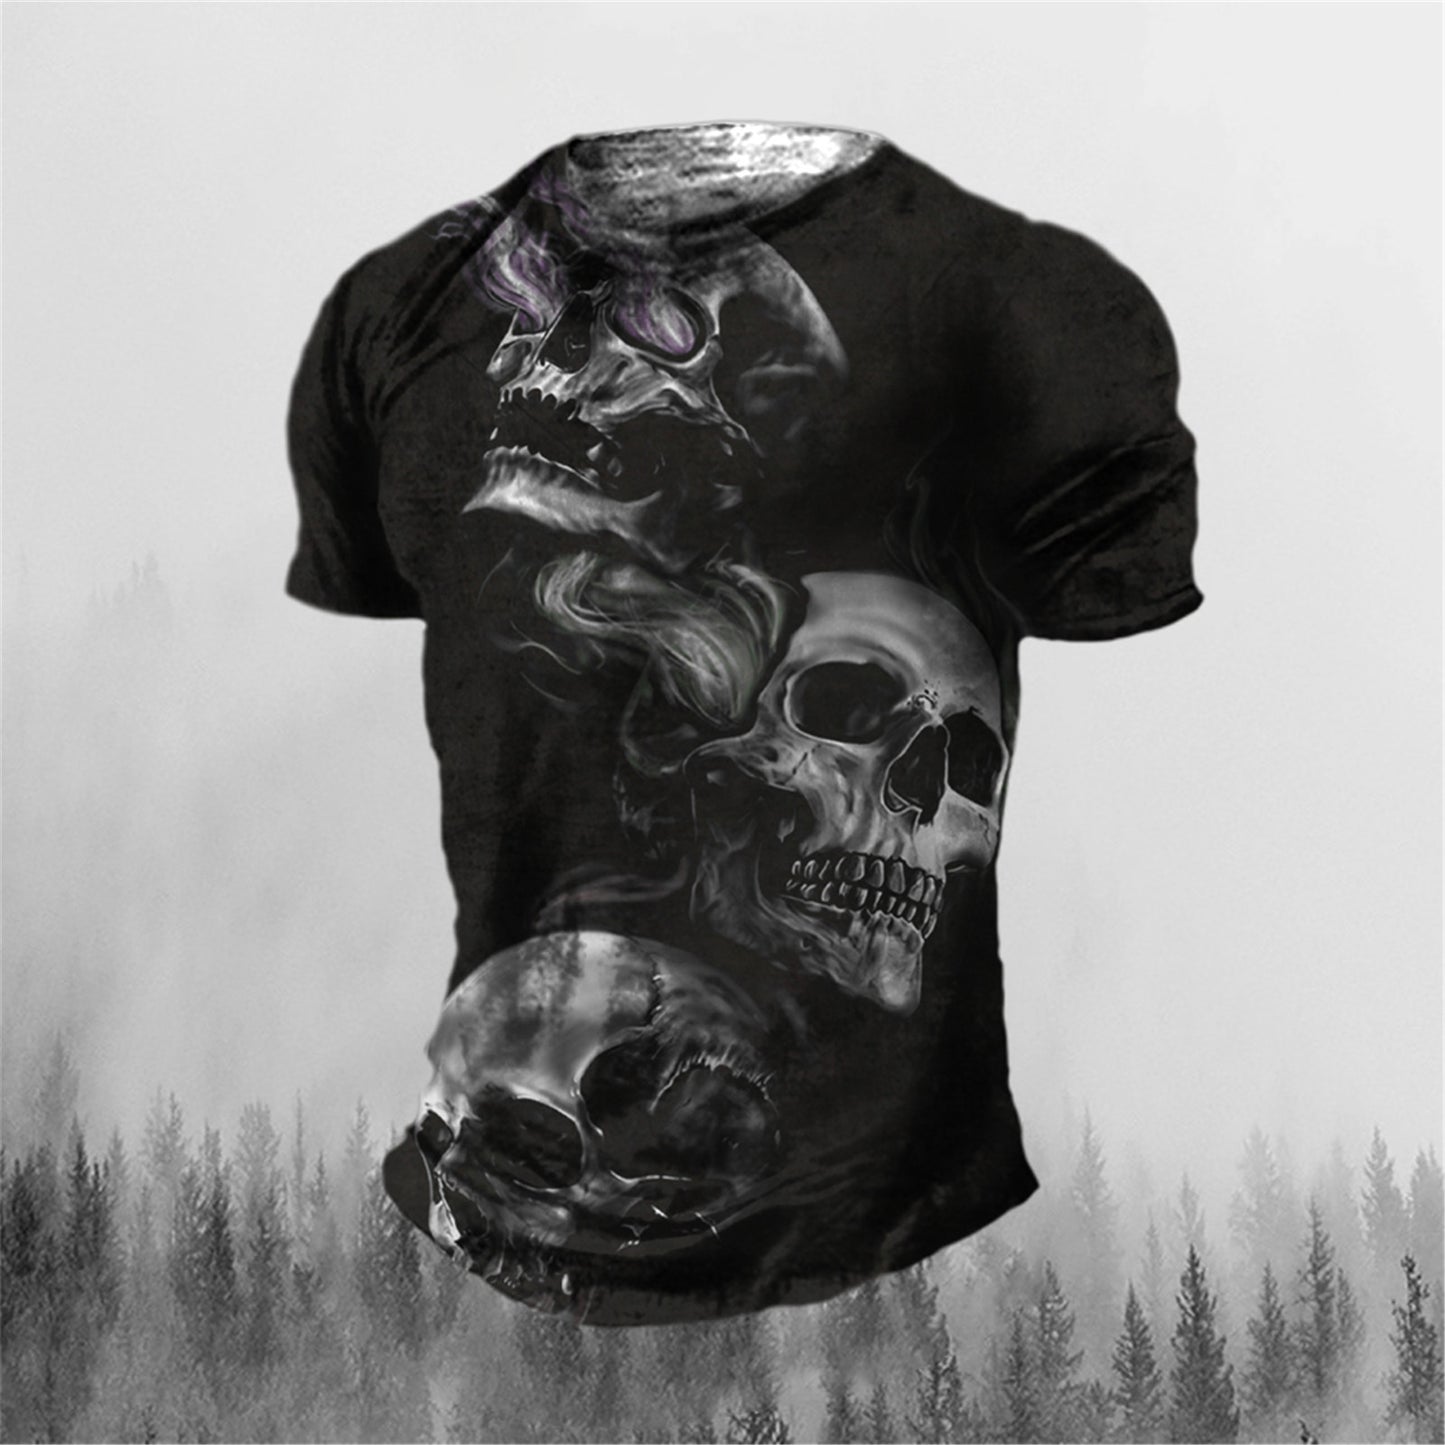 Men's 3D Camouflage Print Loose Tee: A Modern Twist on Classic Style